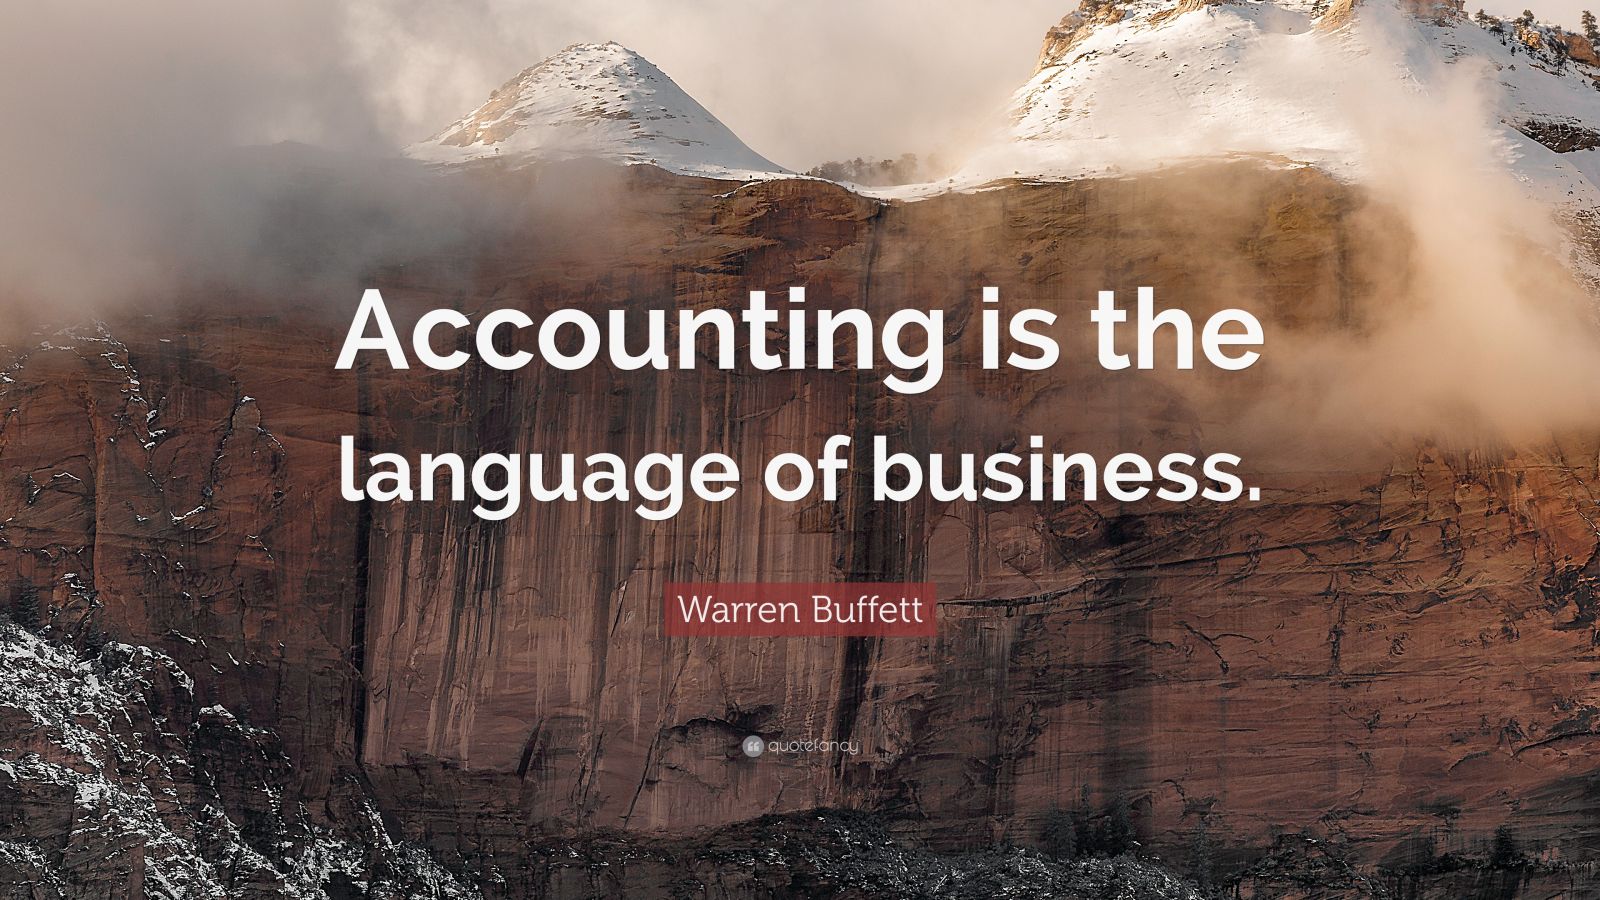 Warren Buffett Quote “Accounting is the language of